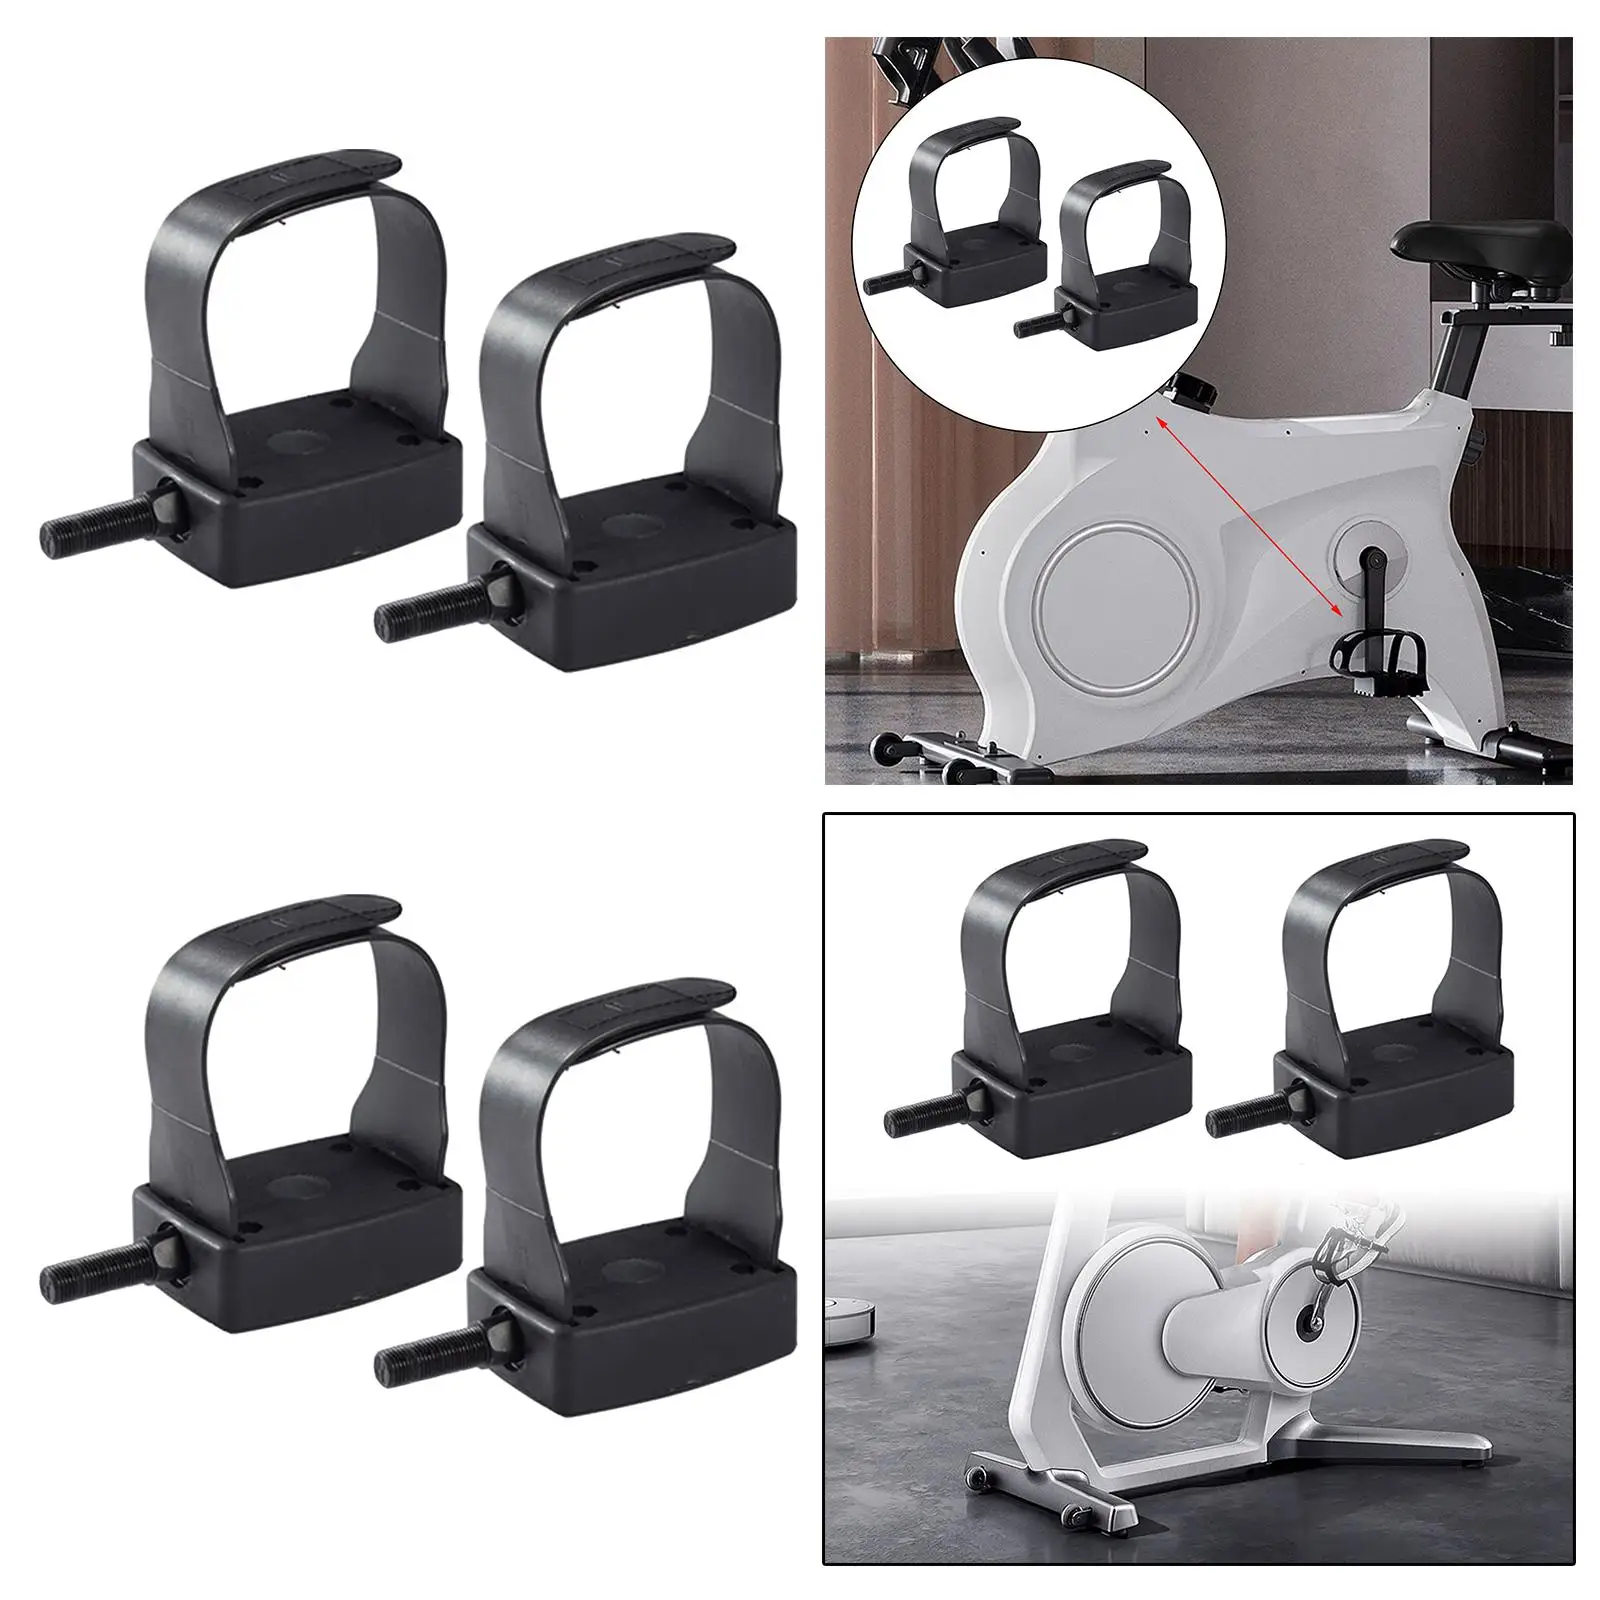 Exercise Bike Pedals Non Slip 2 Pieces for Stationary Bike Fitness Bikes Home/Office Workout Recumbent Bicycle Indoor Cycling